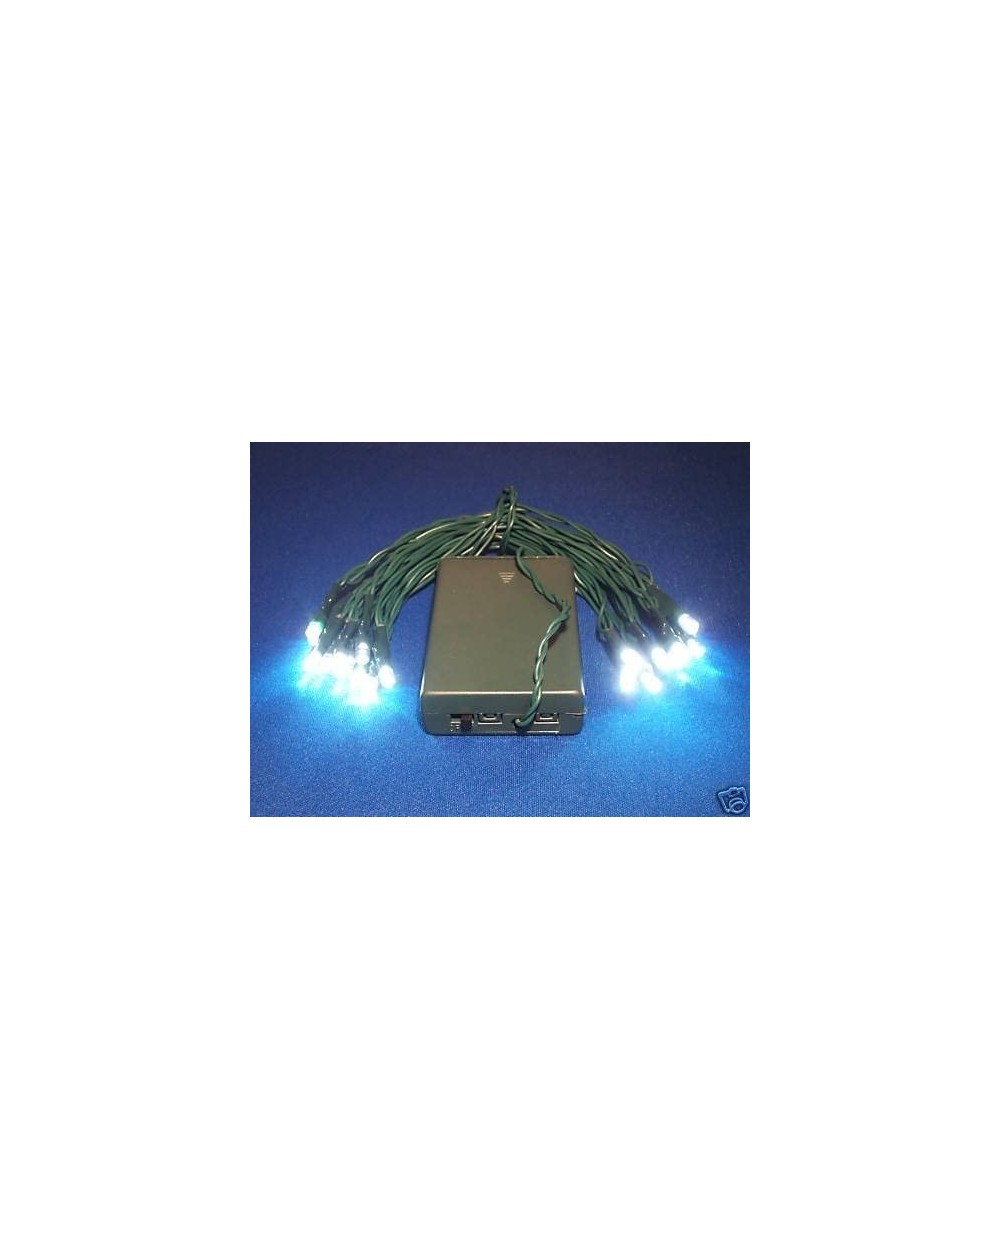 Outdoor String Lights LED Backpacking Lights - Battery Operated - Super Bright White LEDs - CE12LV2129Z $9.66